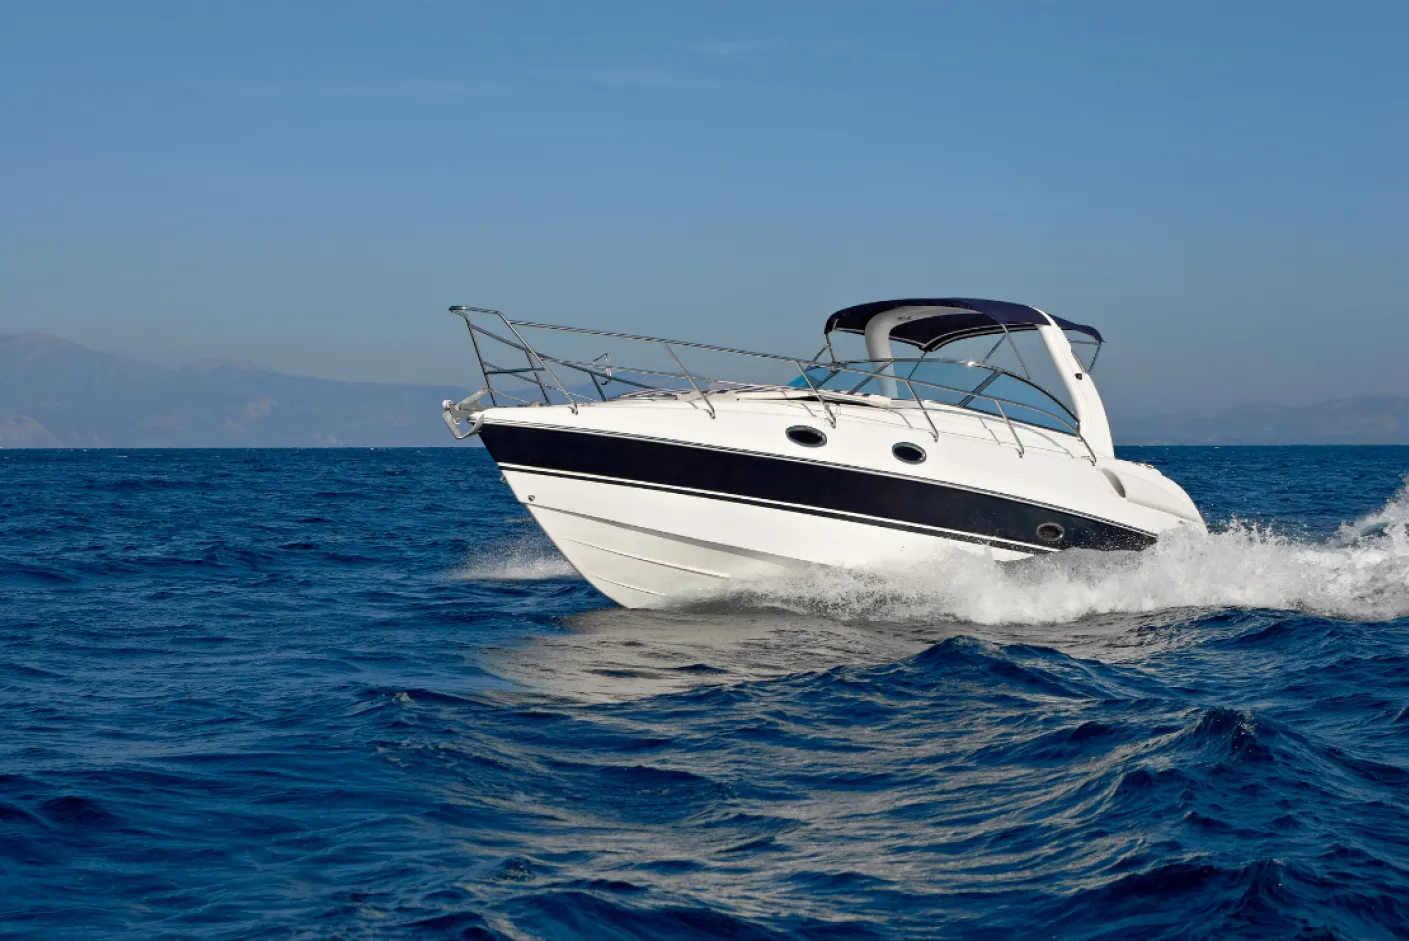 Get to details about the boat licence test in India